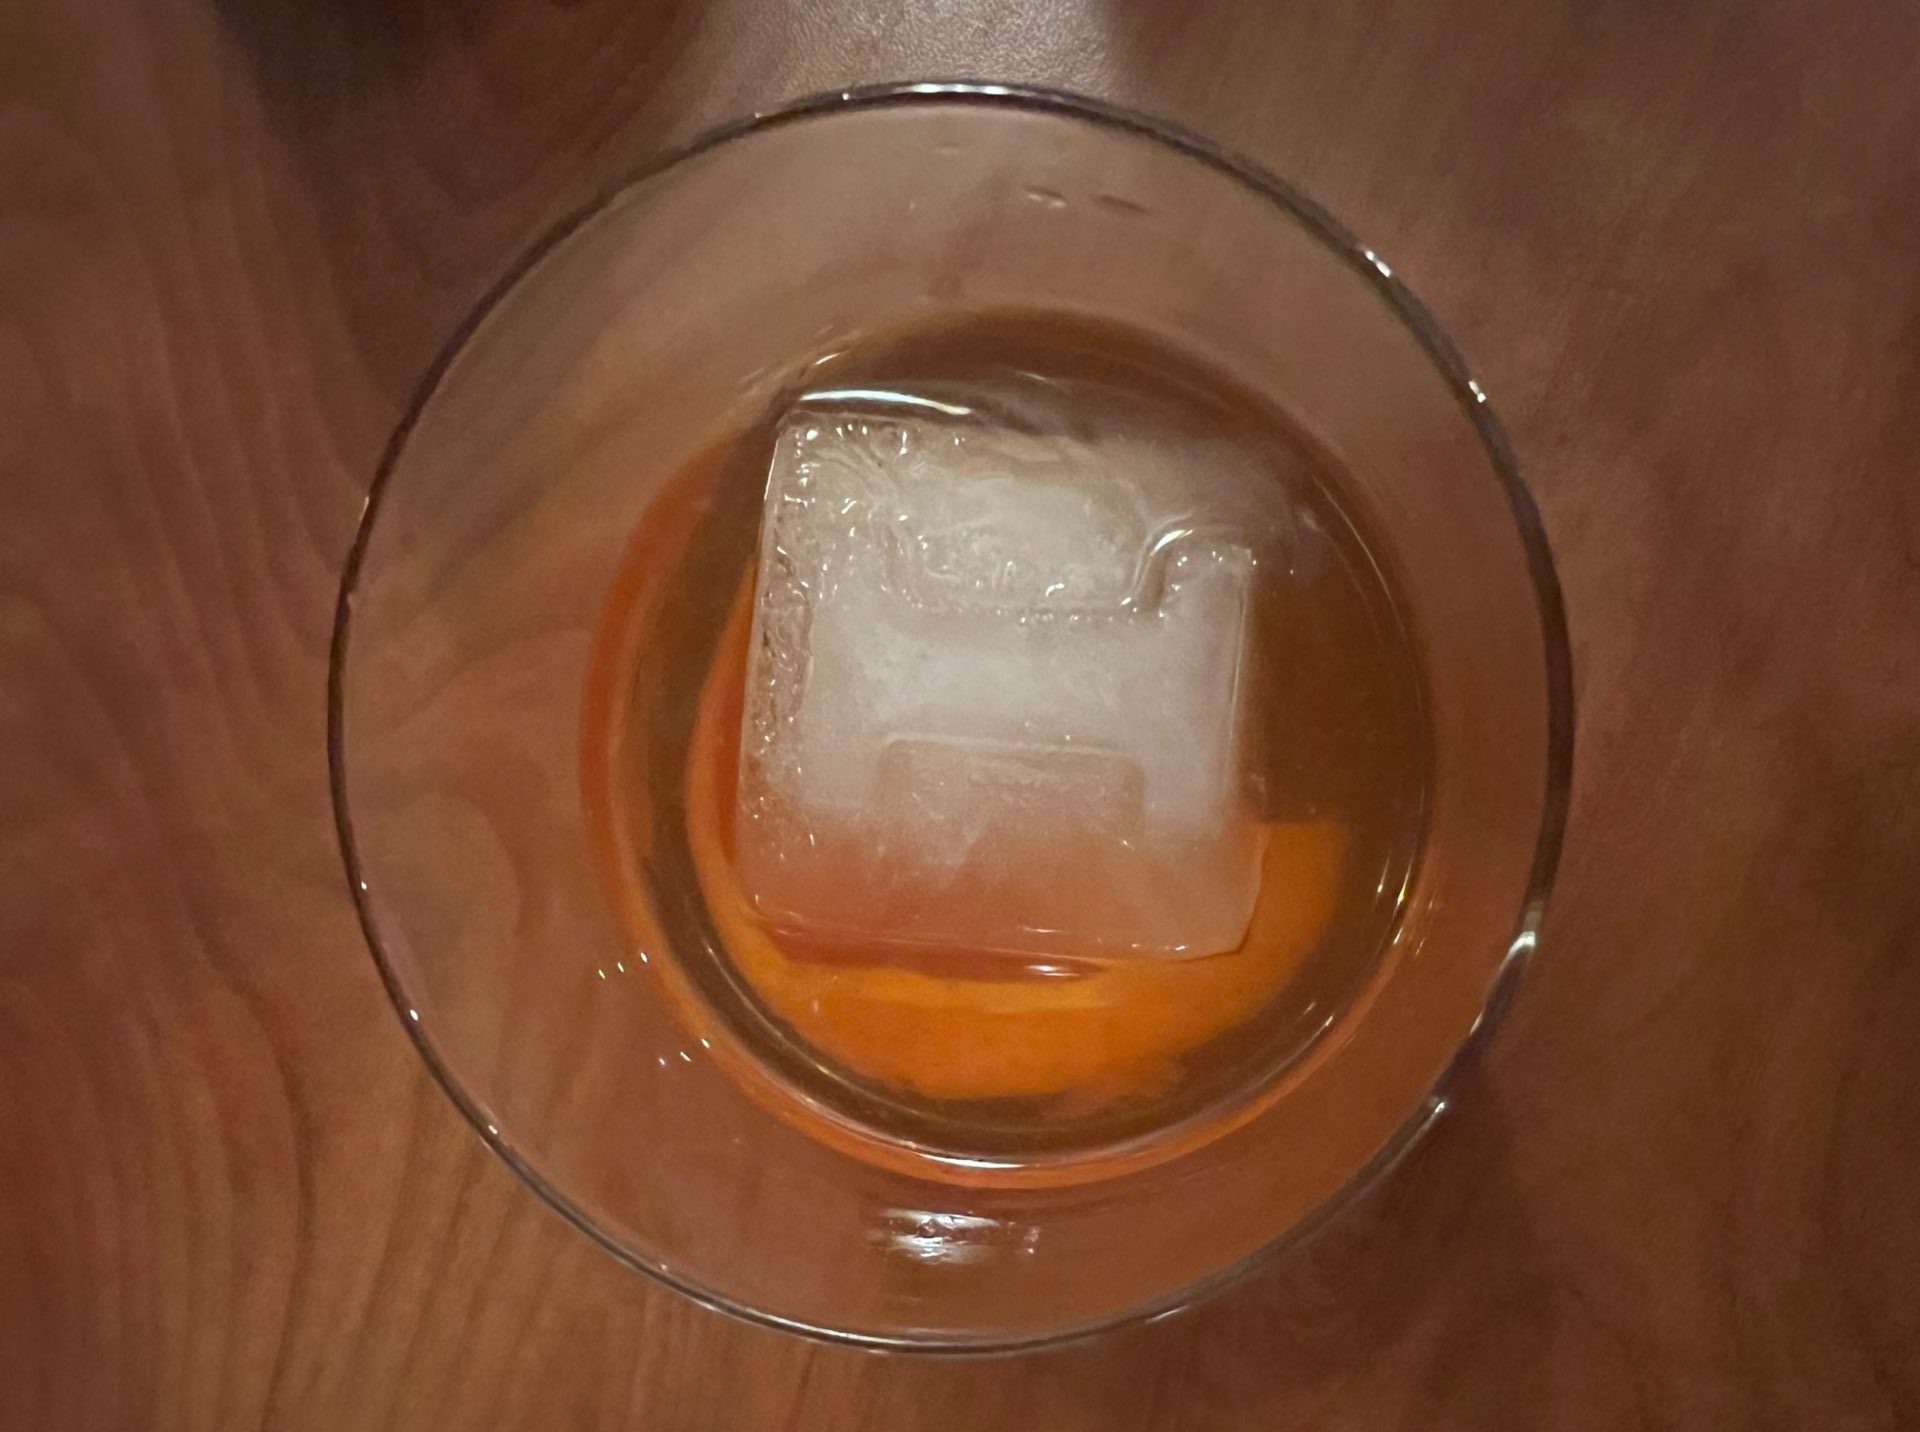 View from above of a clear rocks glass with a light brown liquid in it. There is a large cube of ice with a block "I" carved into it.